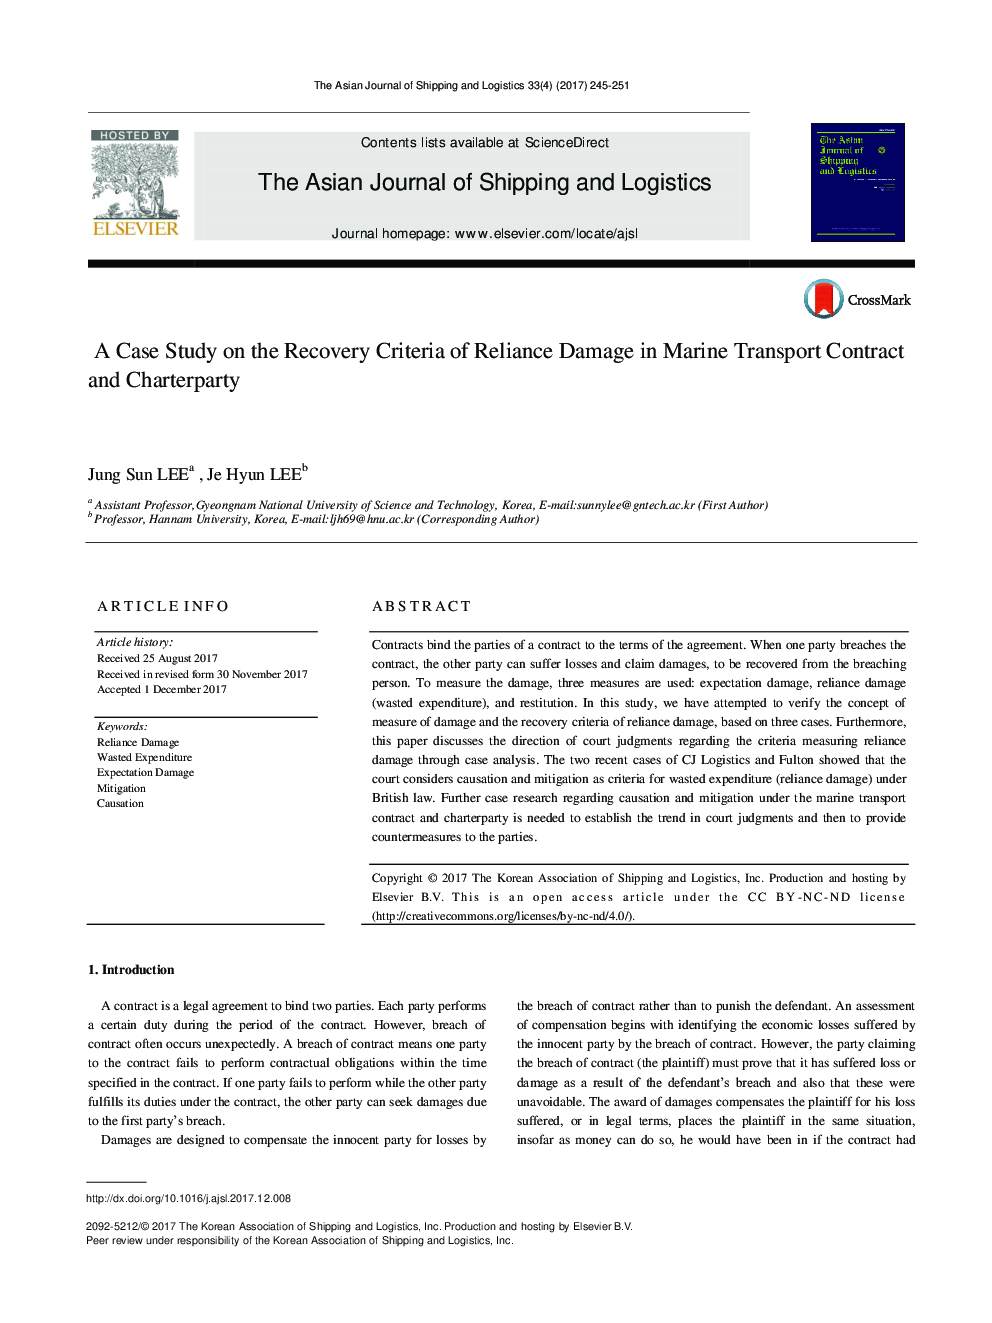 A Case Study on the Recovery Criteria of Reliance Damage in Marine Transport Contract and Charterparty